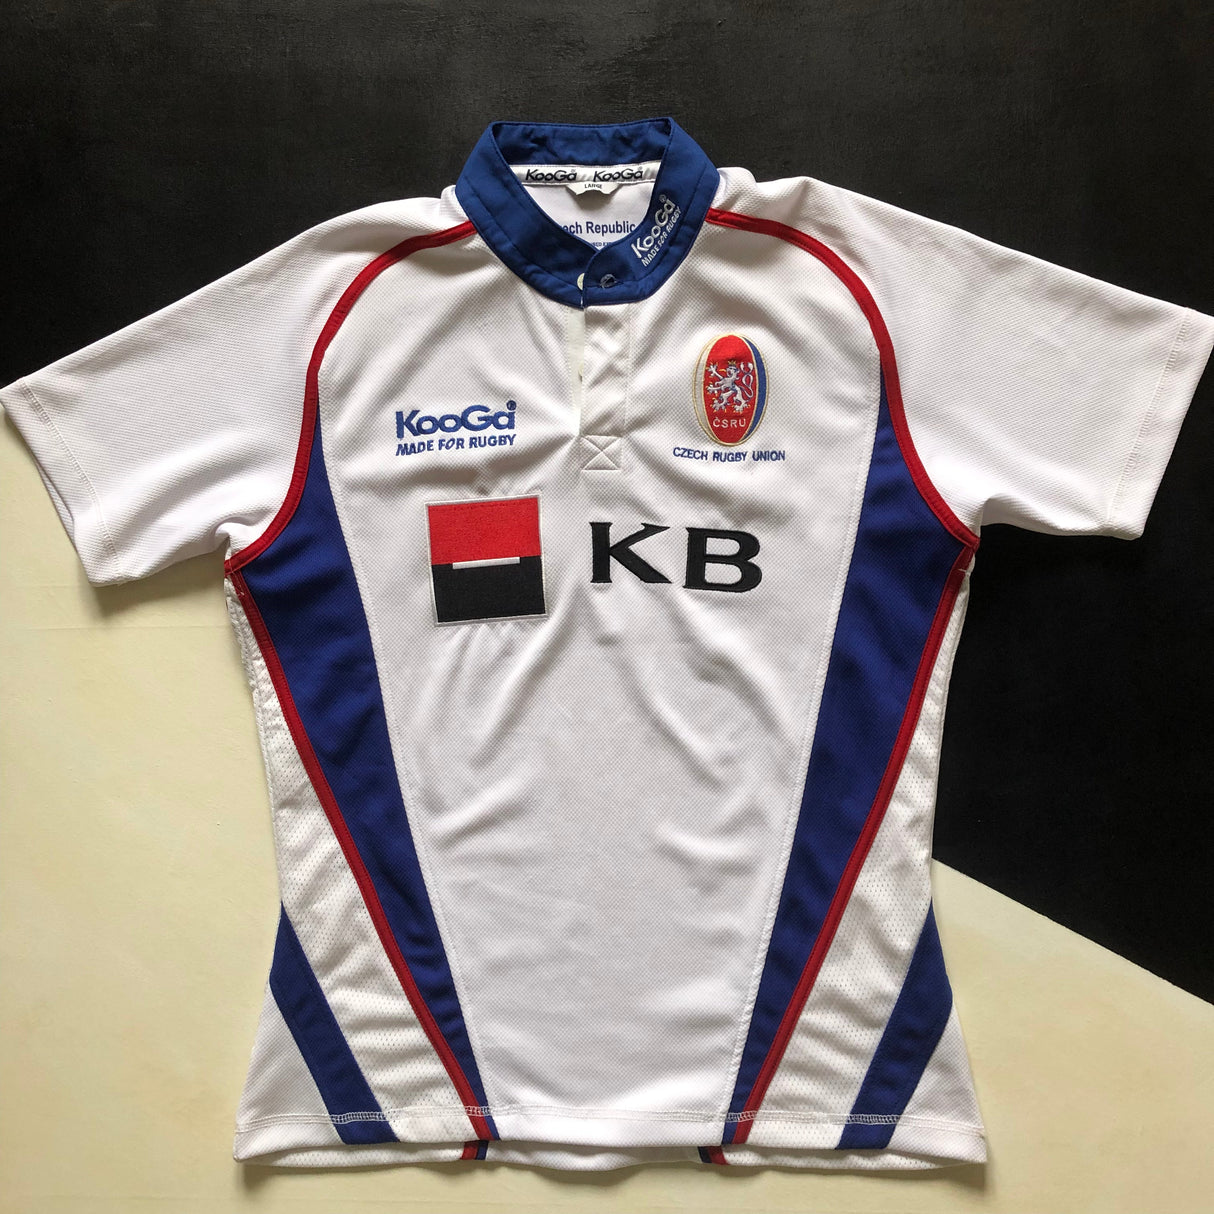 Czech Republic National Rugby Team Jersey 2006 Large Underdog Rugby - The Tier 2 Rugby Shop 